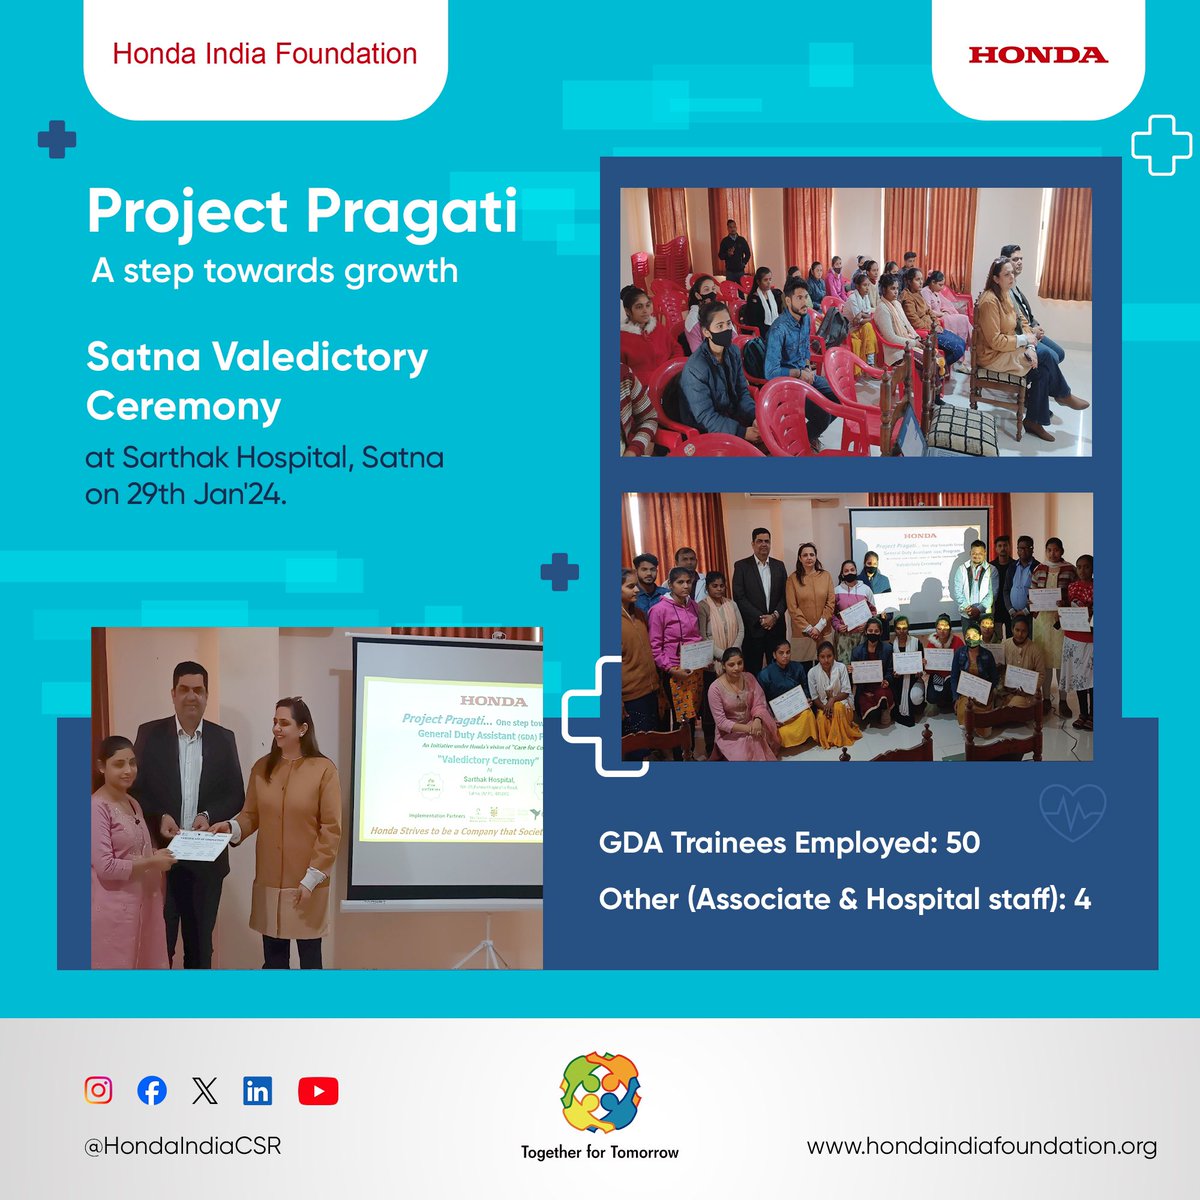 Certificates of completion were handed over to all trainees by HMSI Dignitaries. Over 240+ GDA trainees across these locations have got placed with reputed hospitals.

#HondaIndiaFoundation #HIF #CSR #RuralDevelopment #RuralEducation #RuralHealthcare #ProjectPragati #RuralYouth